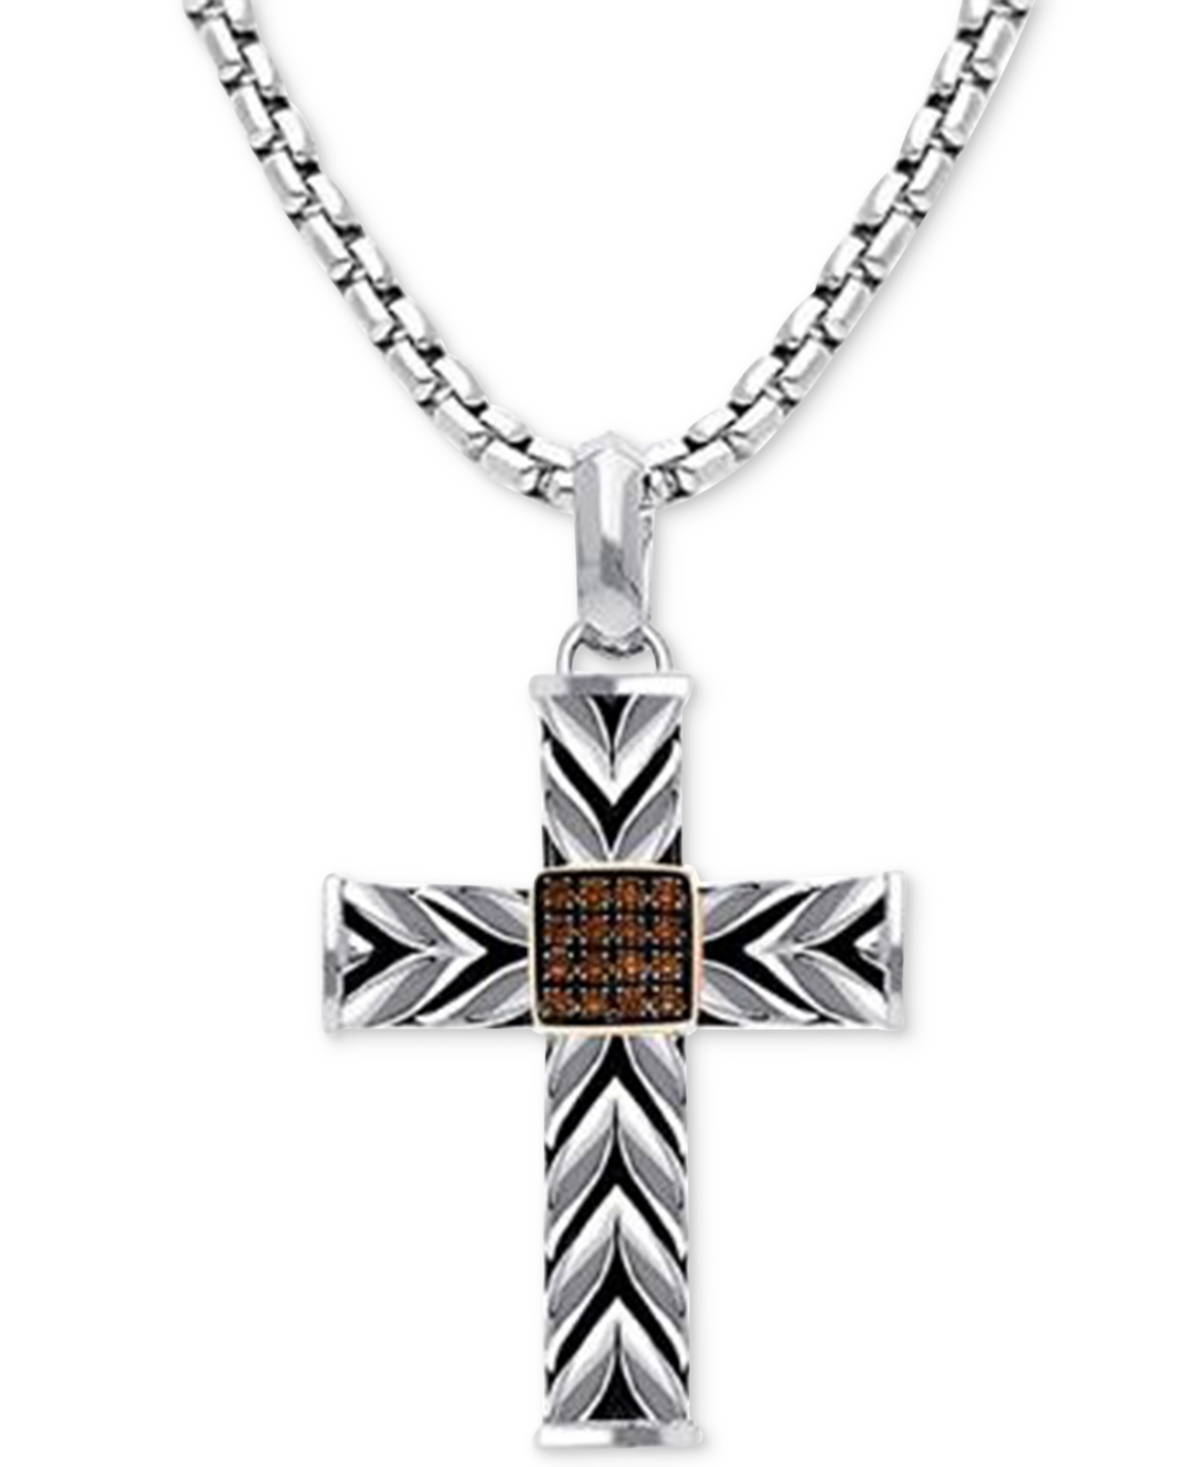 Chocolatier Men's Chocolate Diamond Textured Cross 22" Pendant Necklace (1/8 ct. t.w.) in Sterling Silver & 14k Rose Gold-Plate - Silver